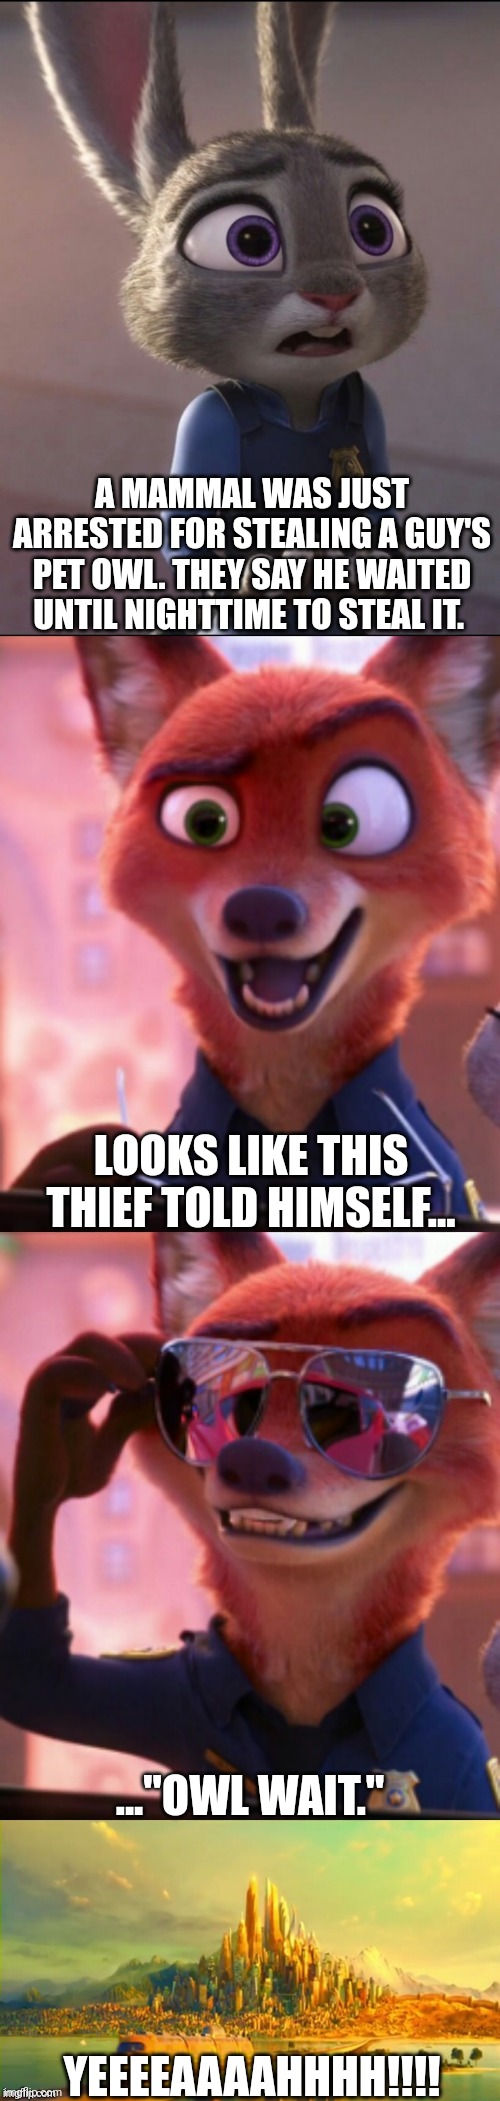 CSI: Zootopia 35 | A MAMMAL WAS JUST ARRESTED FOR STEALING A GUY'S PET OWL. THEY SAY HE WAITED UNTIL NIGHTTIME TO STEAL IT. LOOKS LIKE THIS THIEF TOLD HIMSELF... ..."OWL WAIT."; YEEEEAAAAHHHH!!!! | image tagged in csi zootopia,zootopia,judy hopps,nick wilde,parody,funny | made w/ Imgflip meme maker